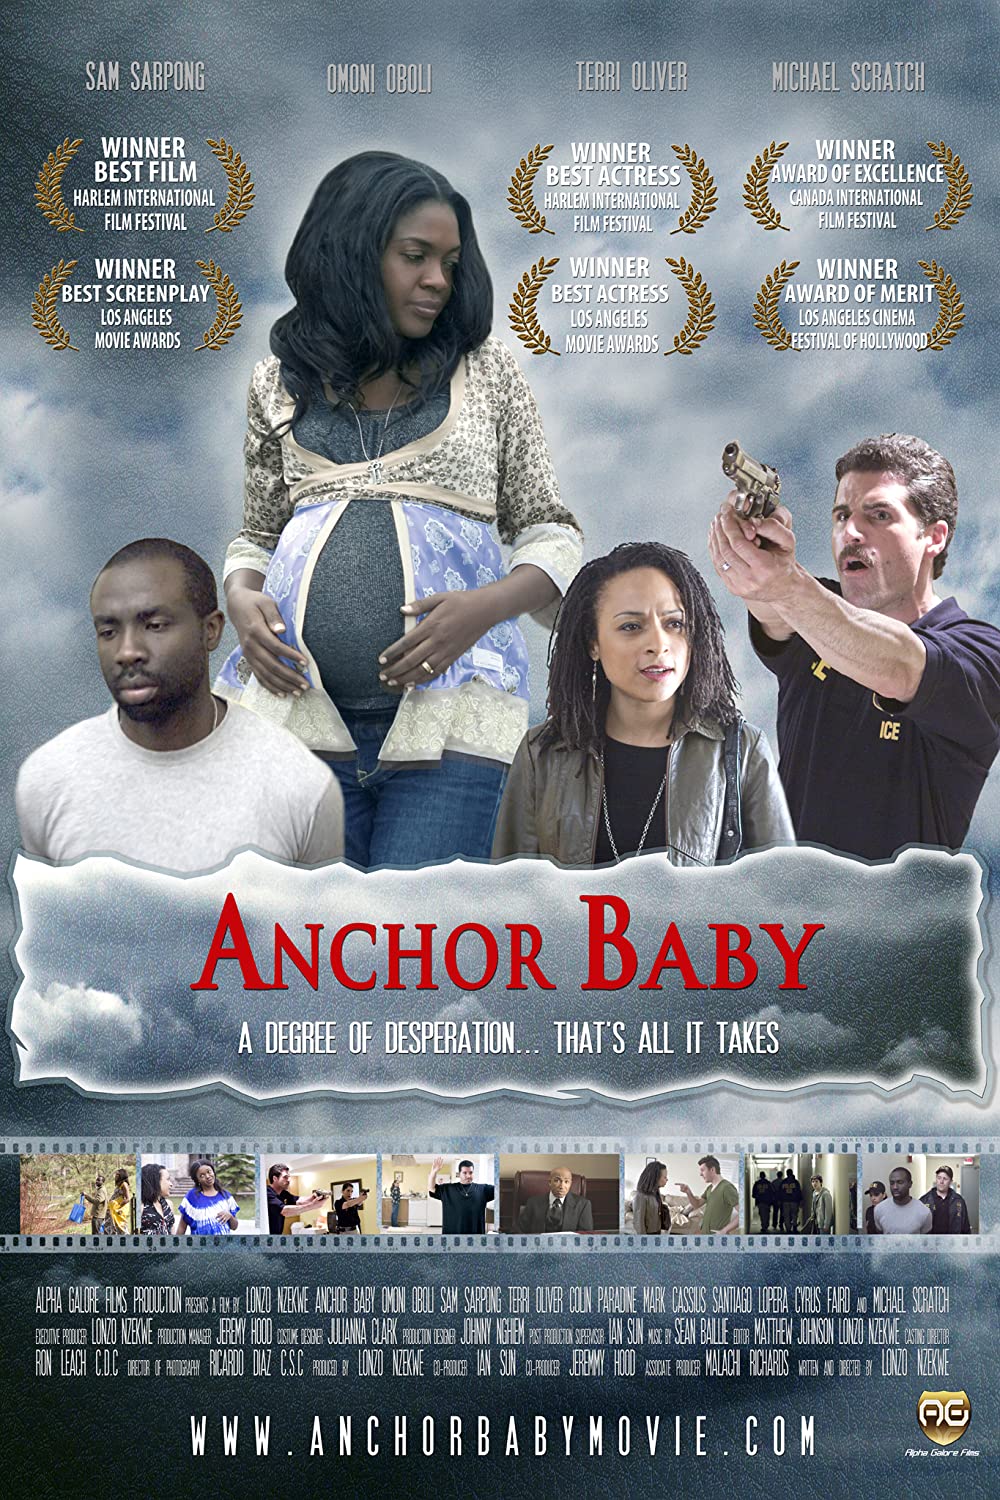 Anchor baby 2010 movie poster